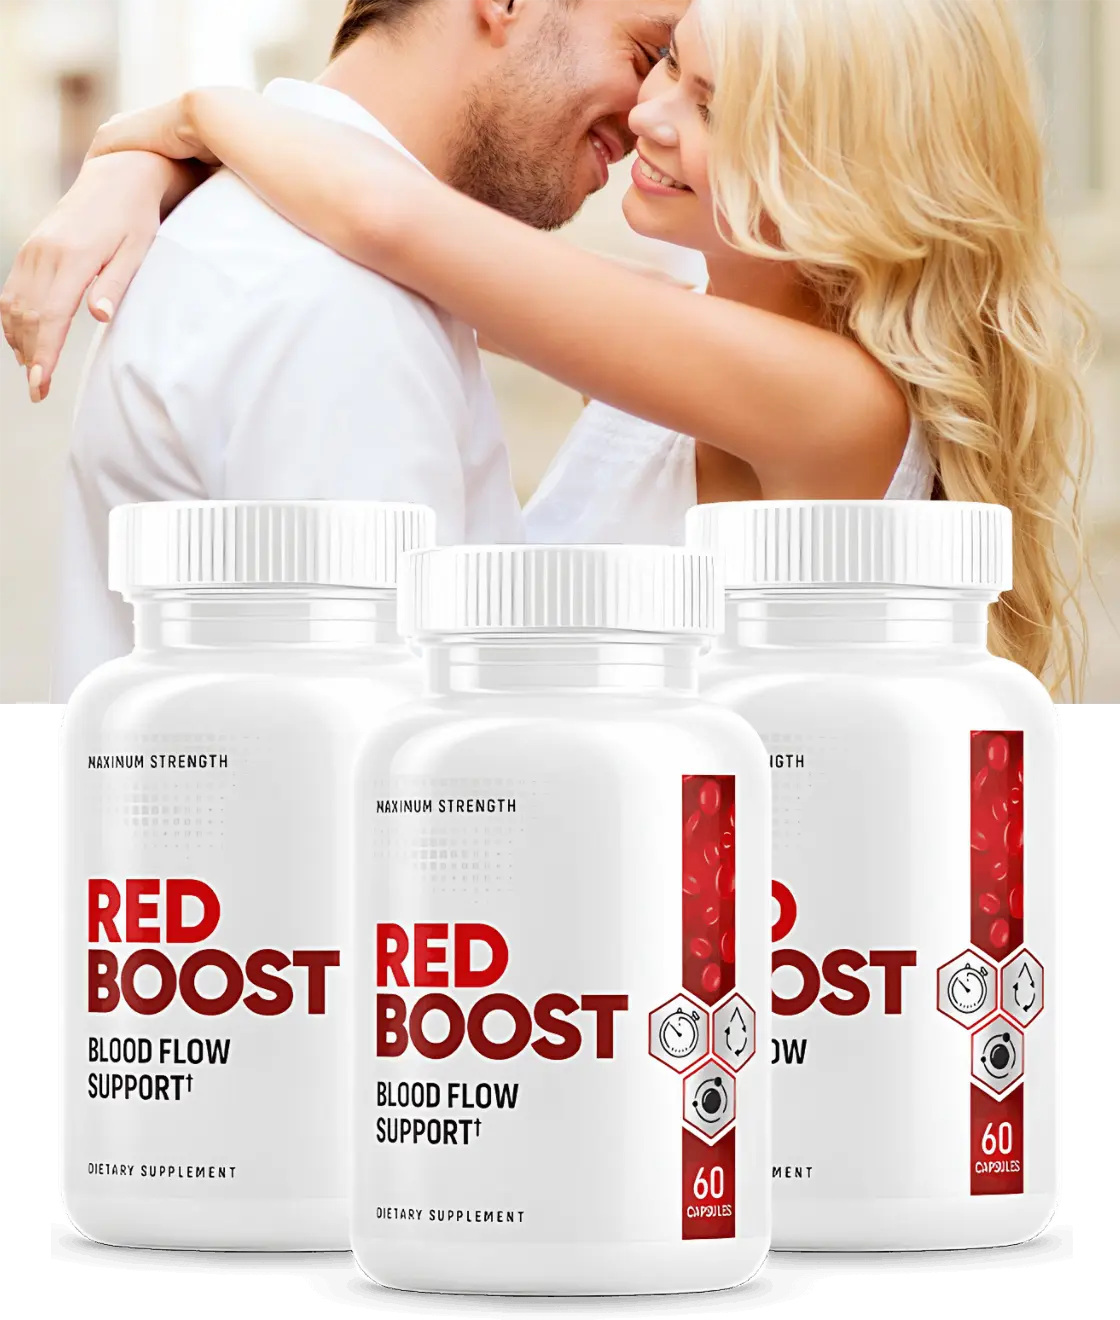 What is Red Boost?